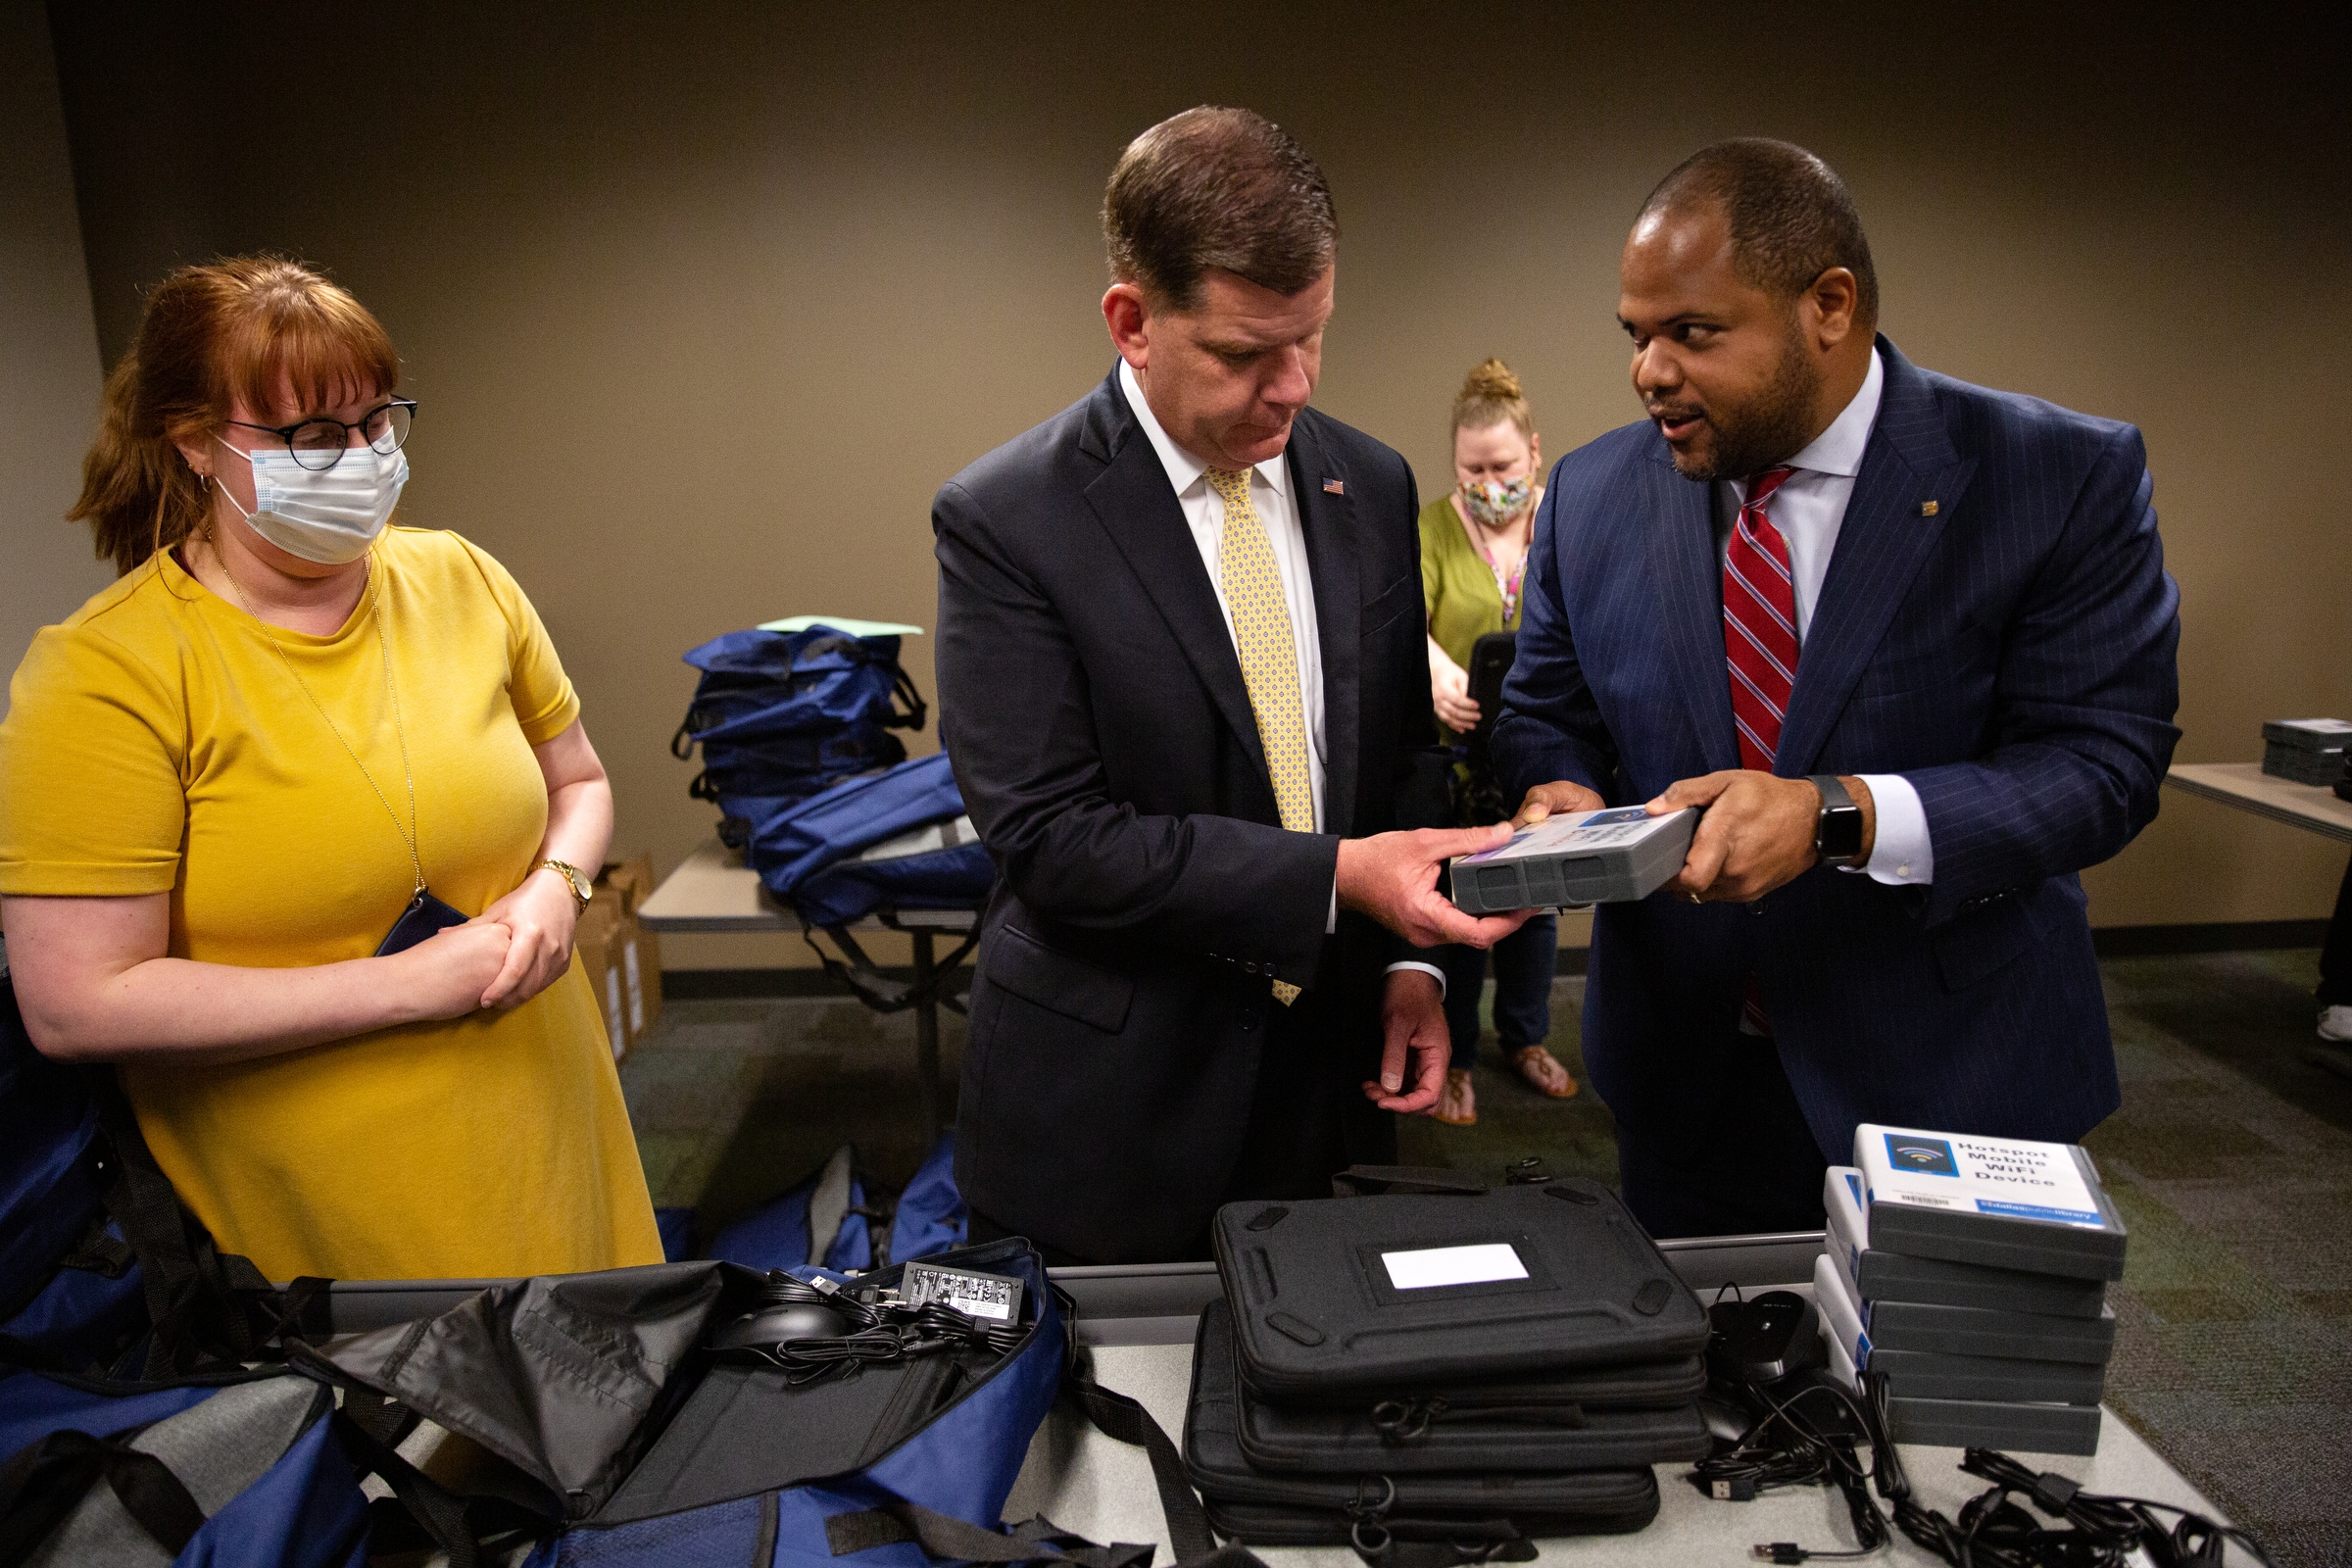 Dallas Mayor Eric Johnson passes a Mi-Fi, or portable Wi-Fi device, to U.S. Secretary of Labor Marty Walsh to place in a package at the J. Erik Jonsson Central Library.